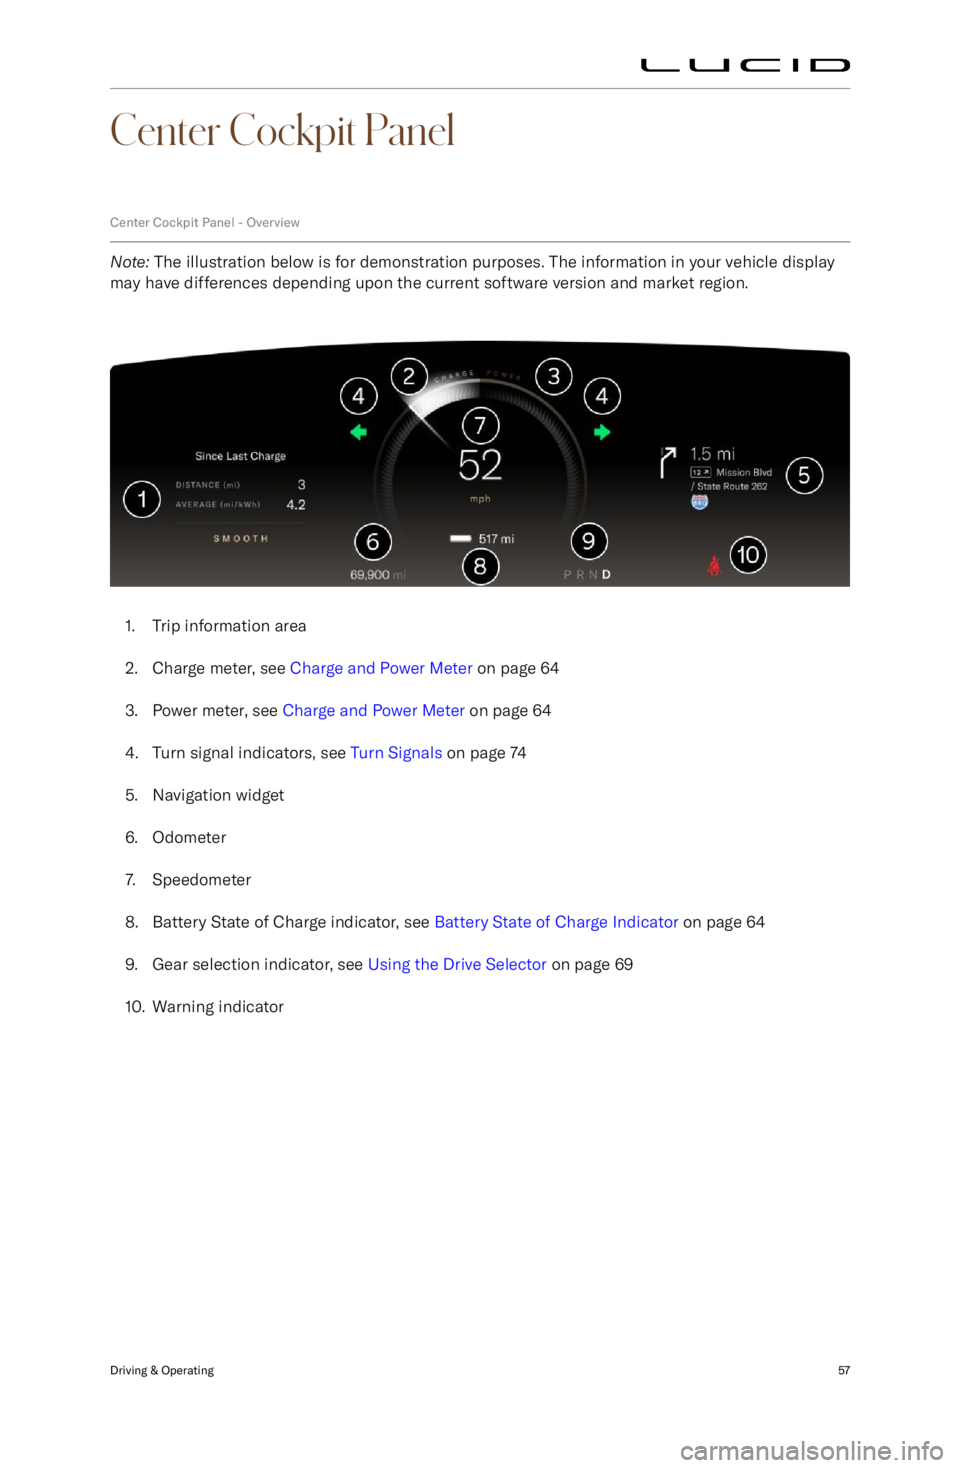 LUCID AIR 2022  Owners Manual Center Cockpit Panel
Center Cockpit Panel - Overview
Note: The illustration below is for demonstration purposes. The information in your vehicle display
may have differences depending upon the current